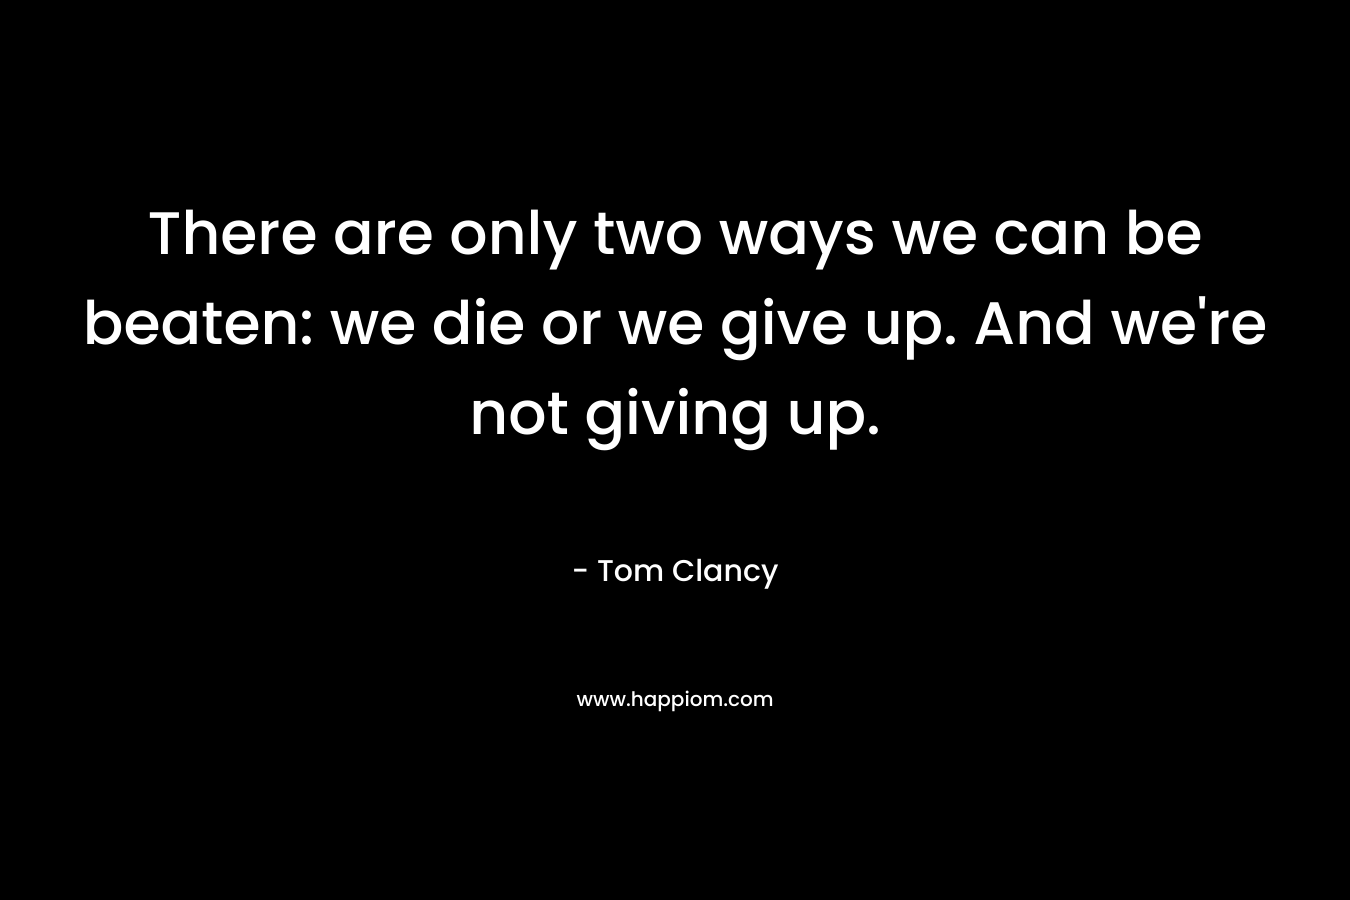 There are only two ways we can be beaten: we die or we give up. And we're not giving up.